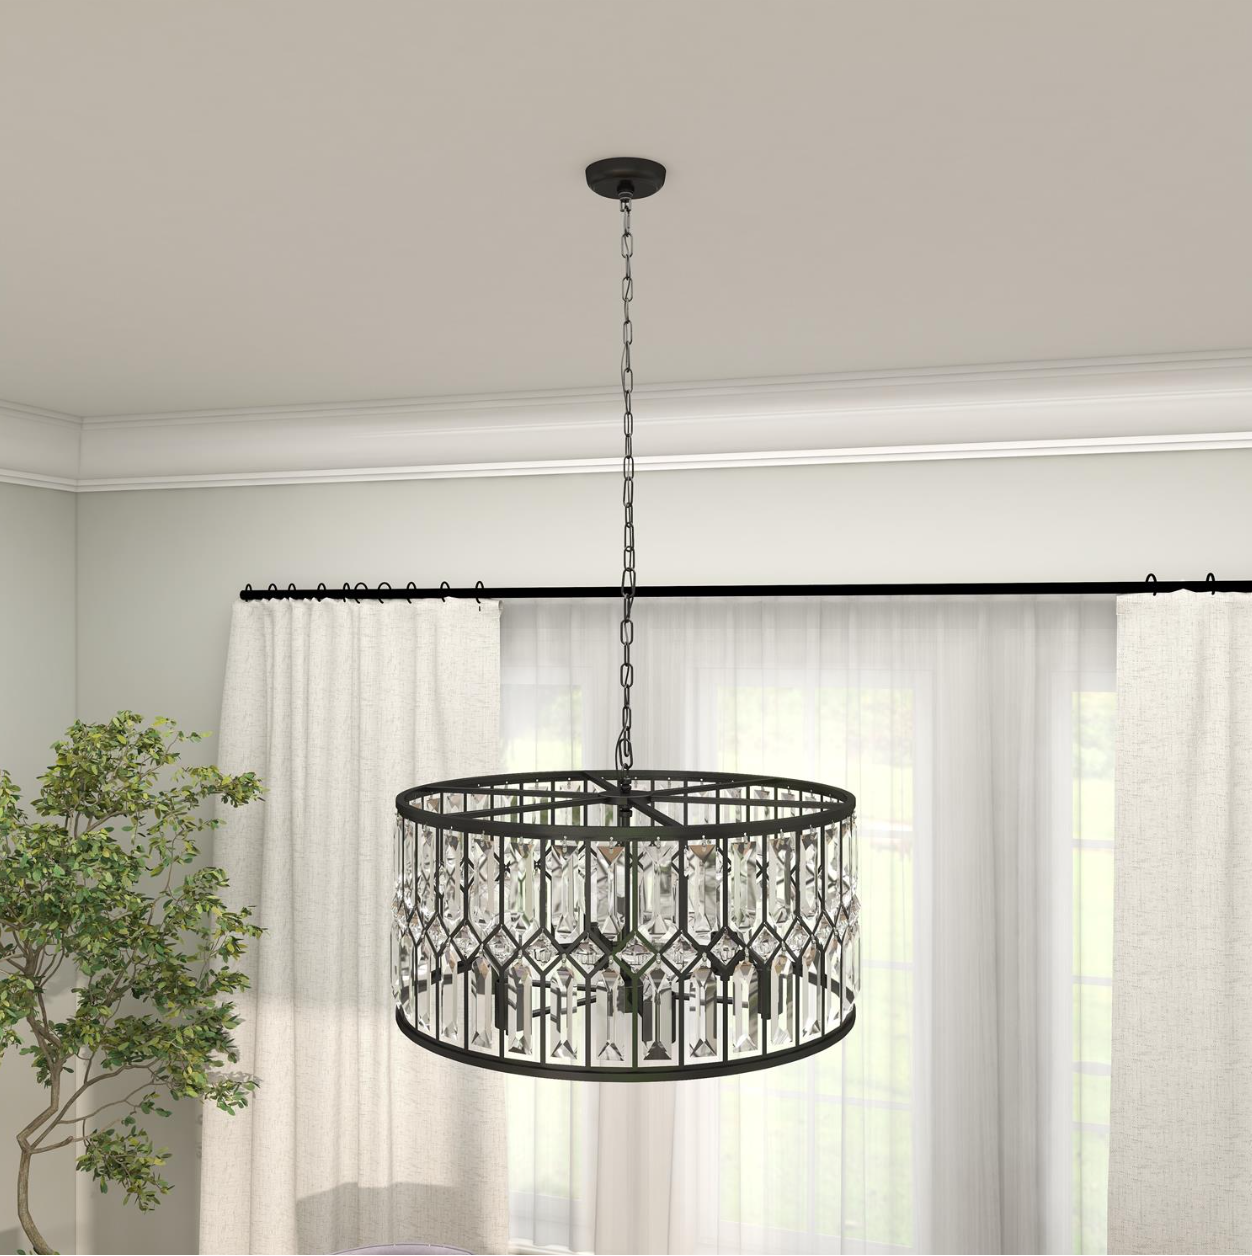 Black Metal Crystal Embellished 6 Light Chandelier With Link Style Chain. 24"x24"x13"